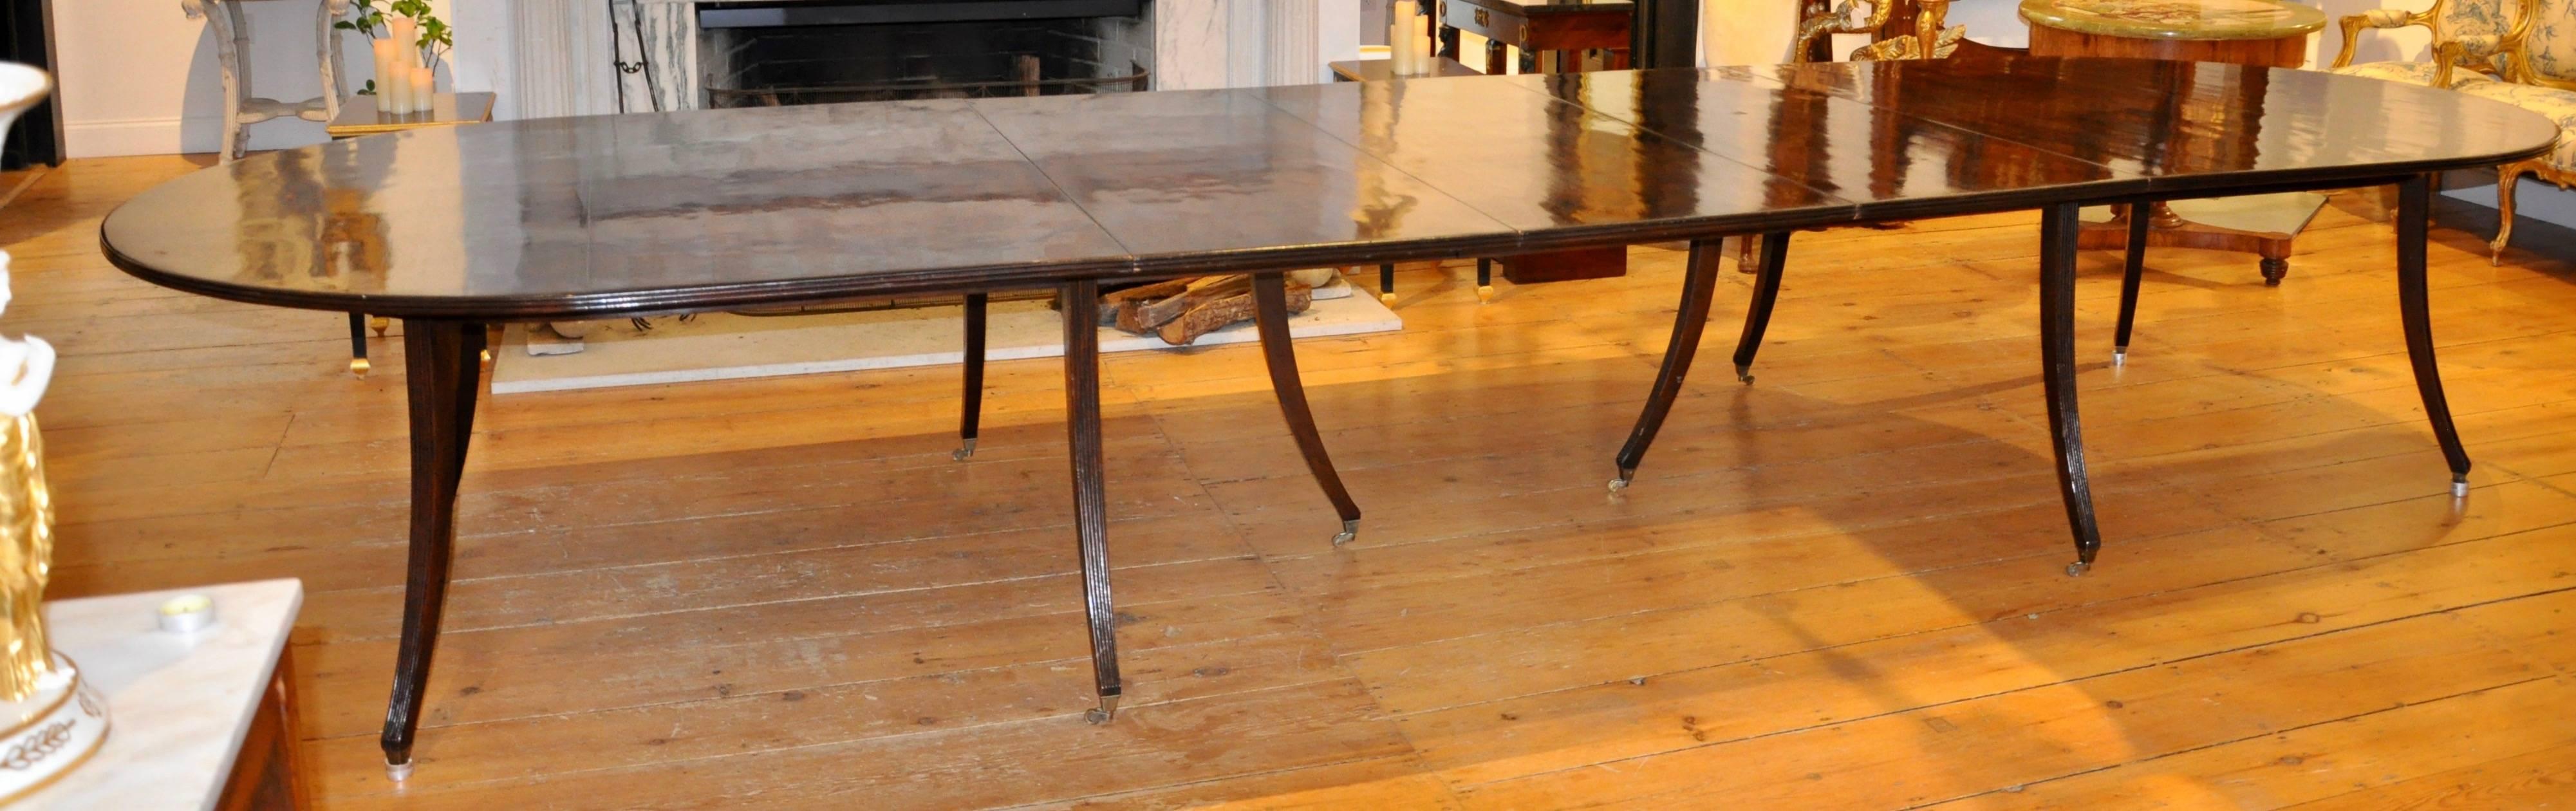 Custom Commissioned Mid-Century Style Dining Table in Mahogany

--Reeded Splay Legs
--Rich Mahogany Choice
--In Regency Period Inspiration
--Works in Modern as Well as Traditional
--Has Three Leaves
--maximum length is 195